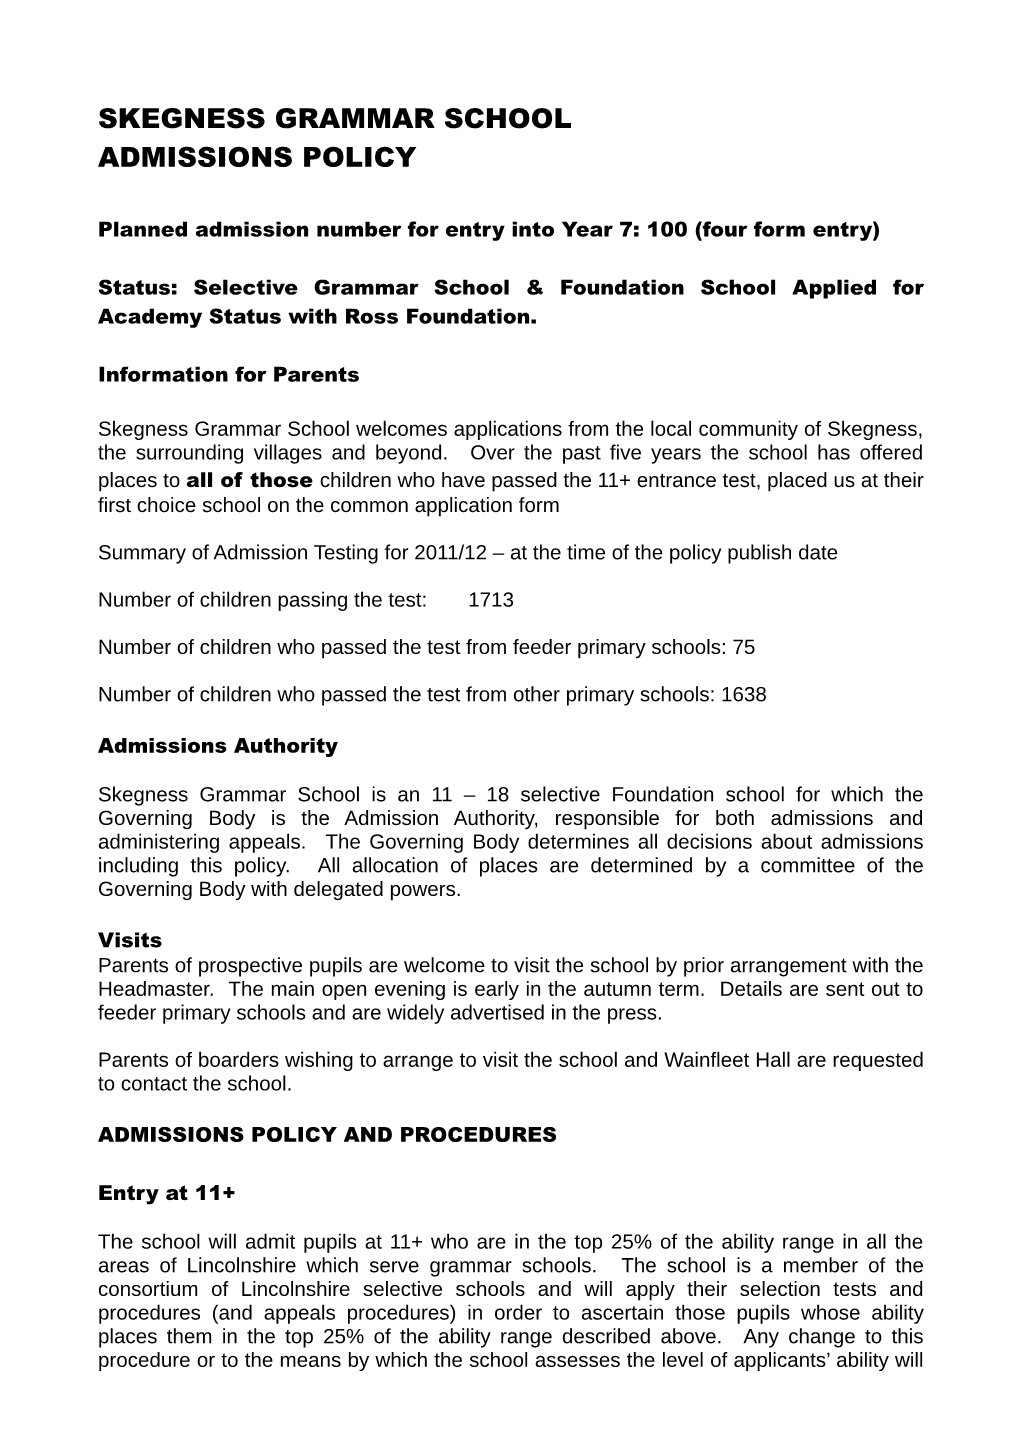 Admissions Policy 2012-1